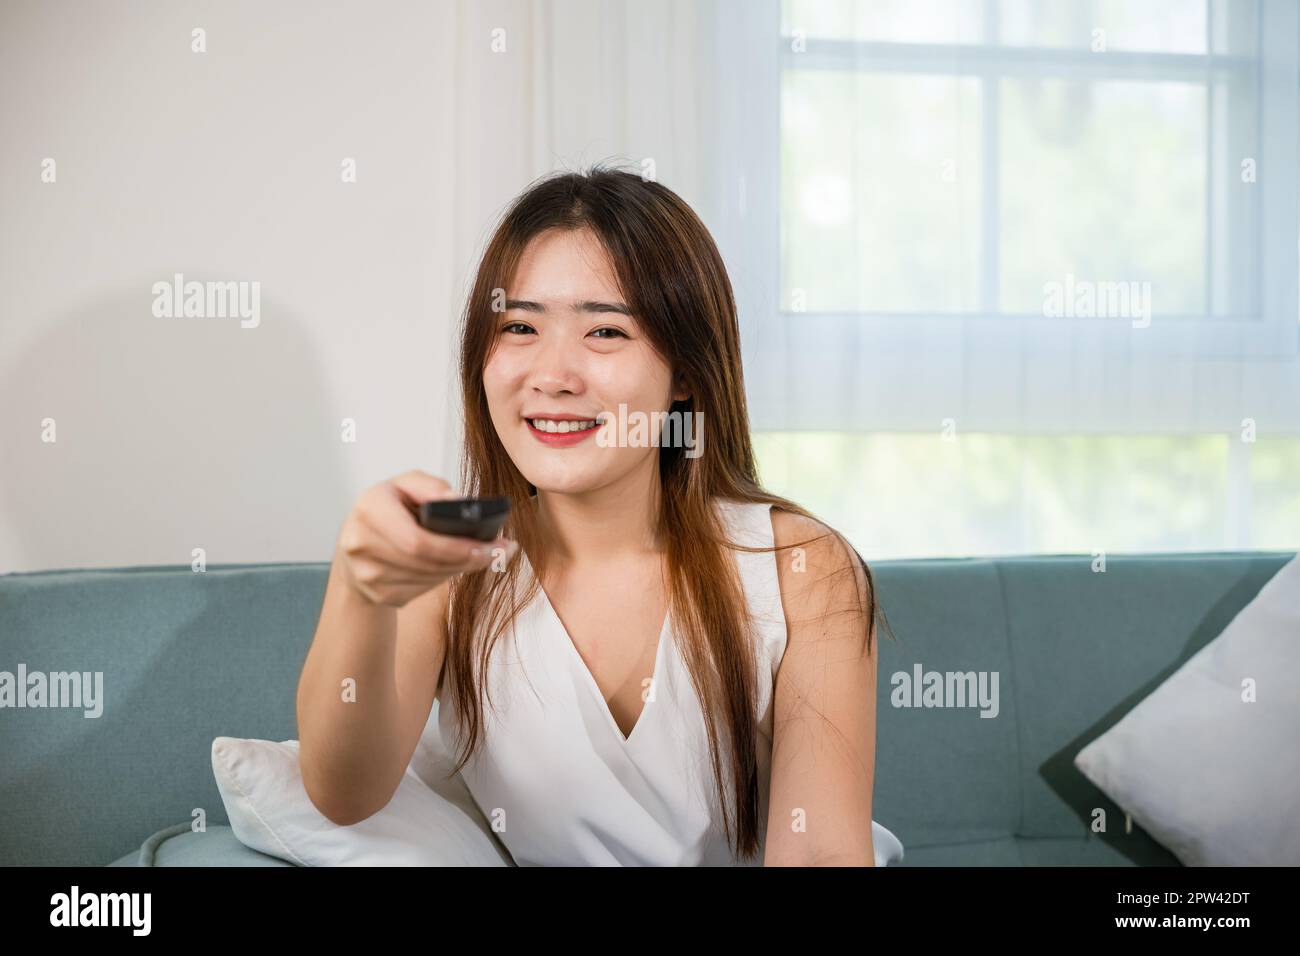 Beautiful female person look movie holding remote controller watching television, woman smiling sit relaxing watch TV hold remote control looking news Stock Photo